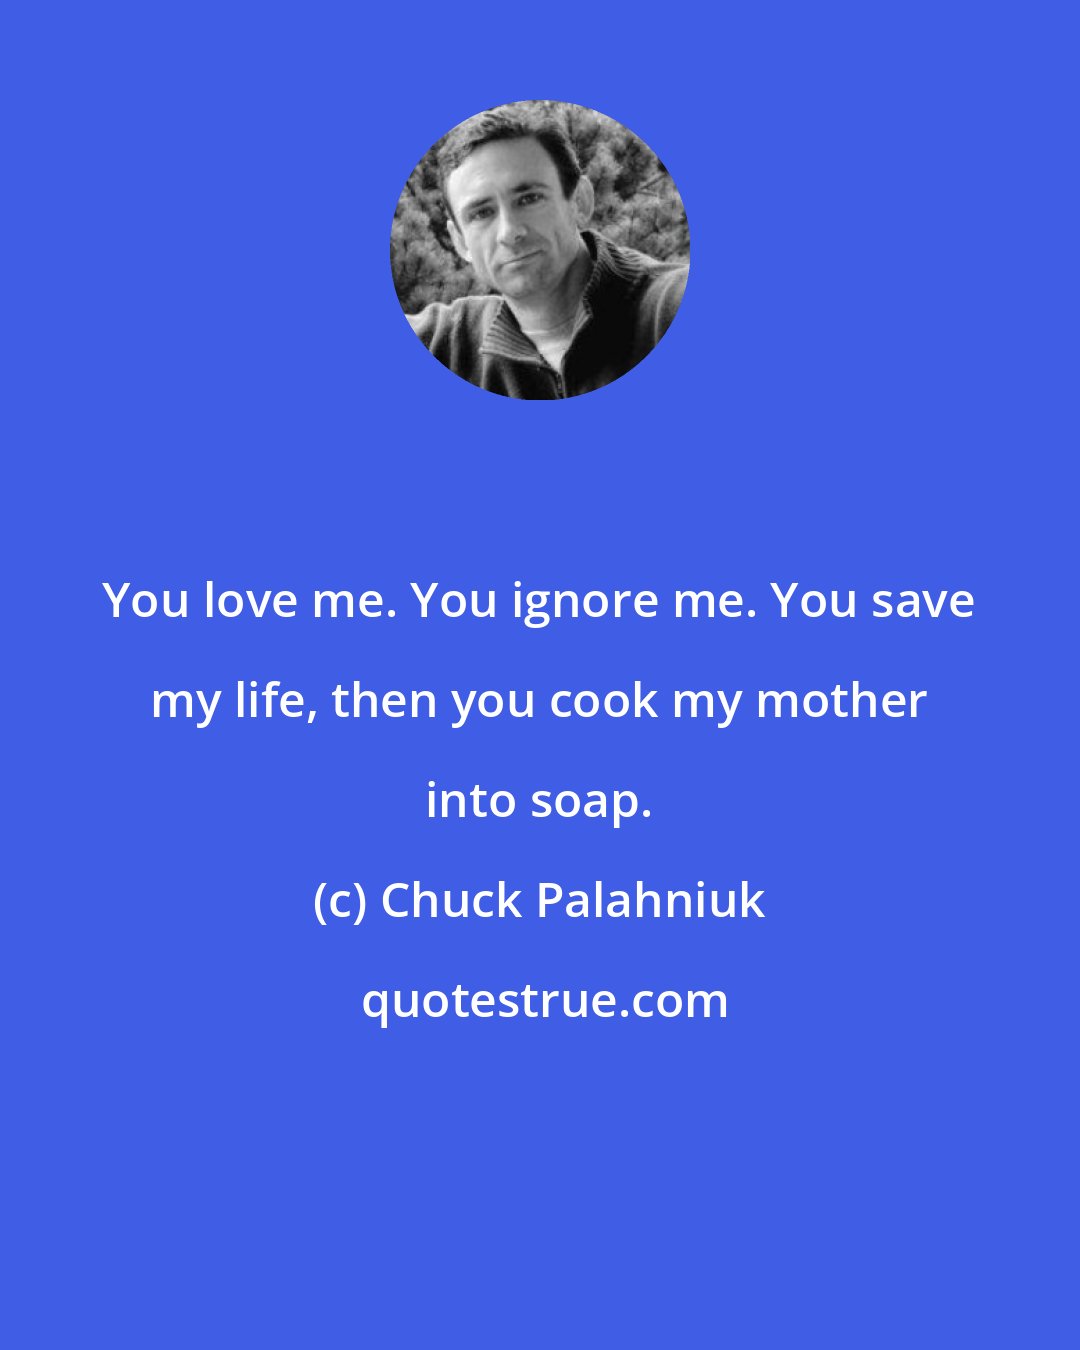 Chuck Palahniuk: You love me. You ignore me. You save my life, then you cook my mother into soap.